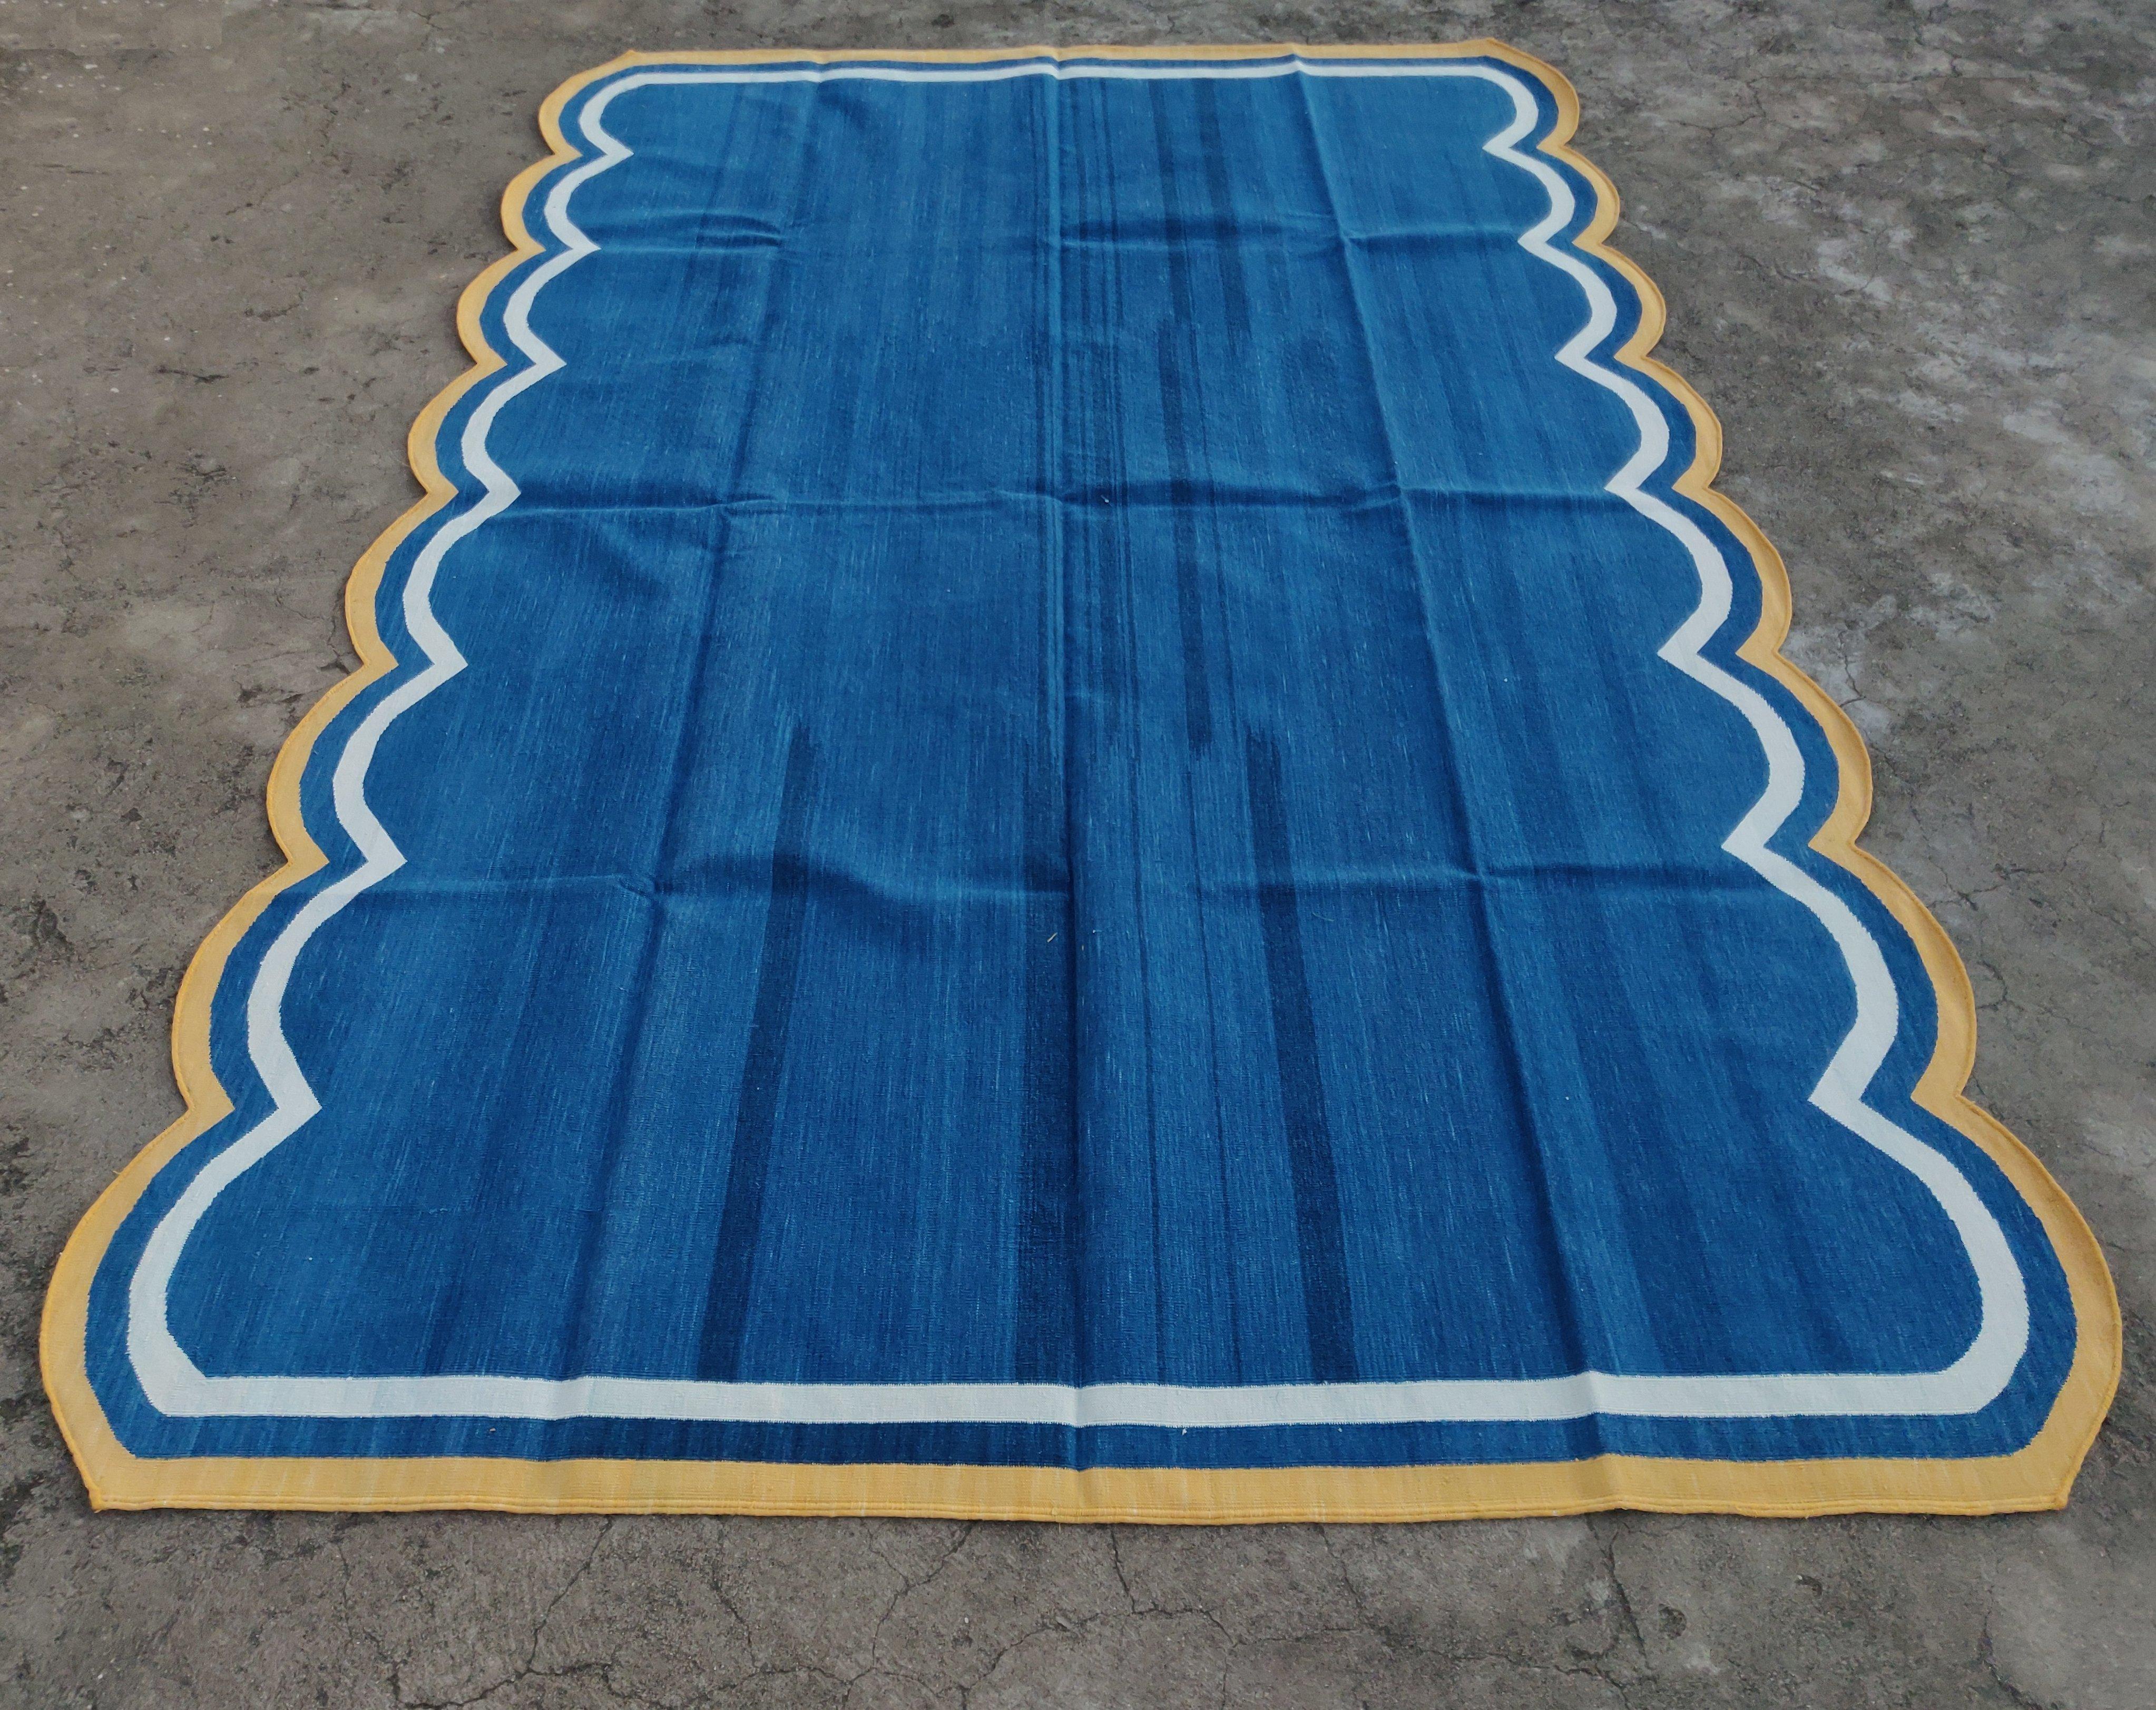 Hand-Woven Handmade Cotton Area Flat Weave Rug, 8x10 Blue And Yellow Scallop Kilim Dhurrie For Sale